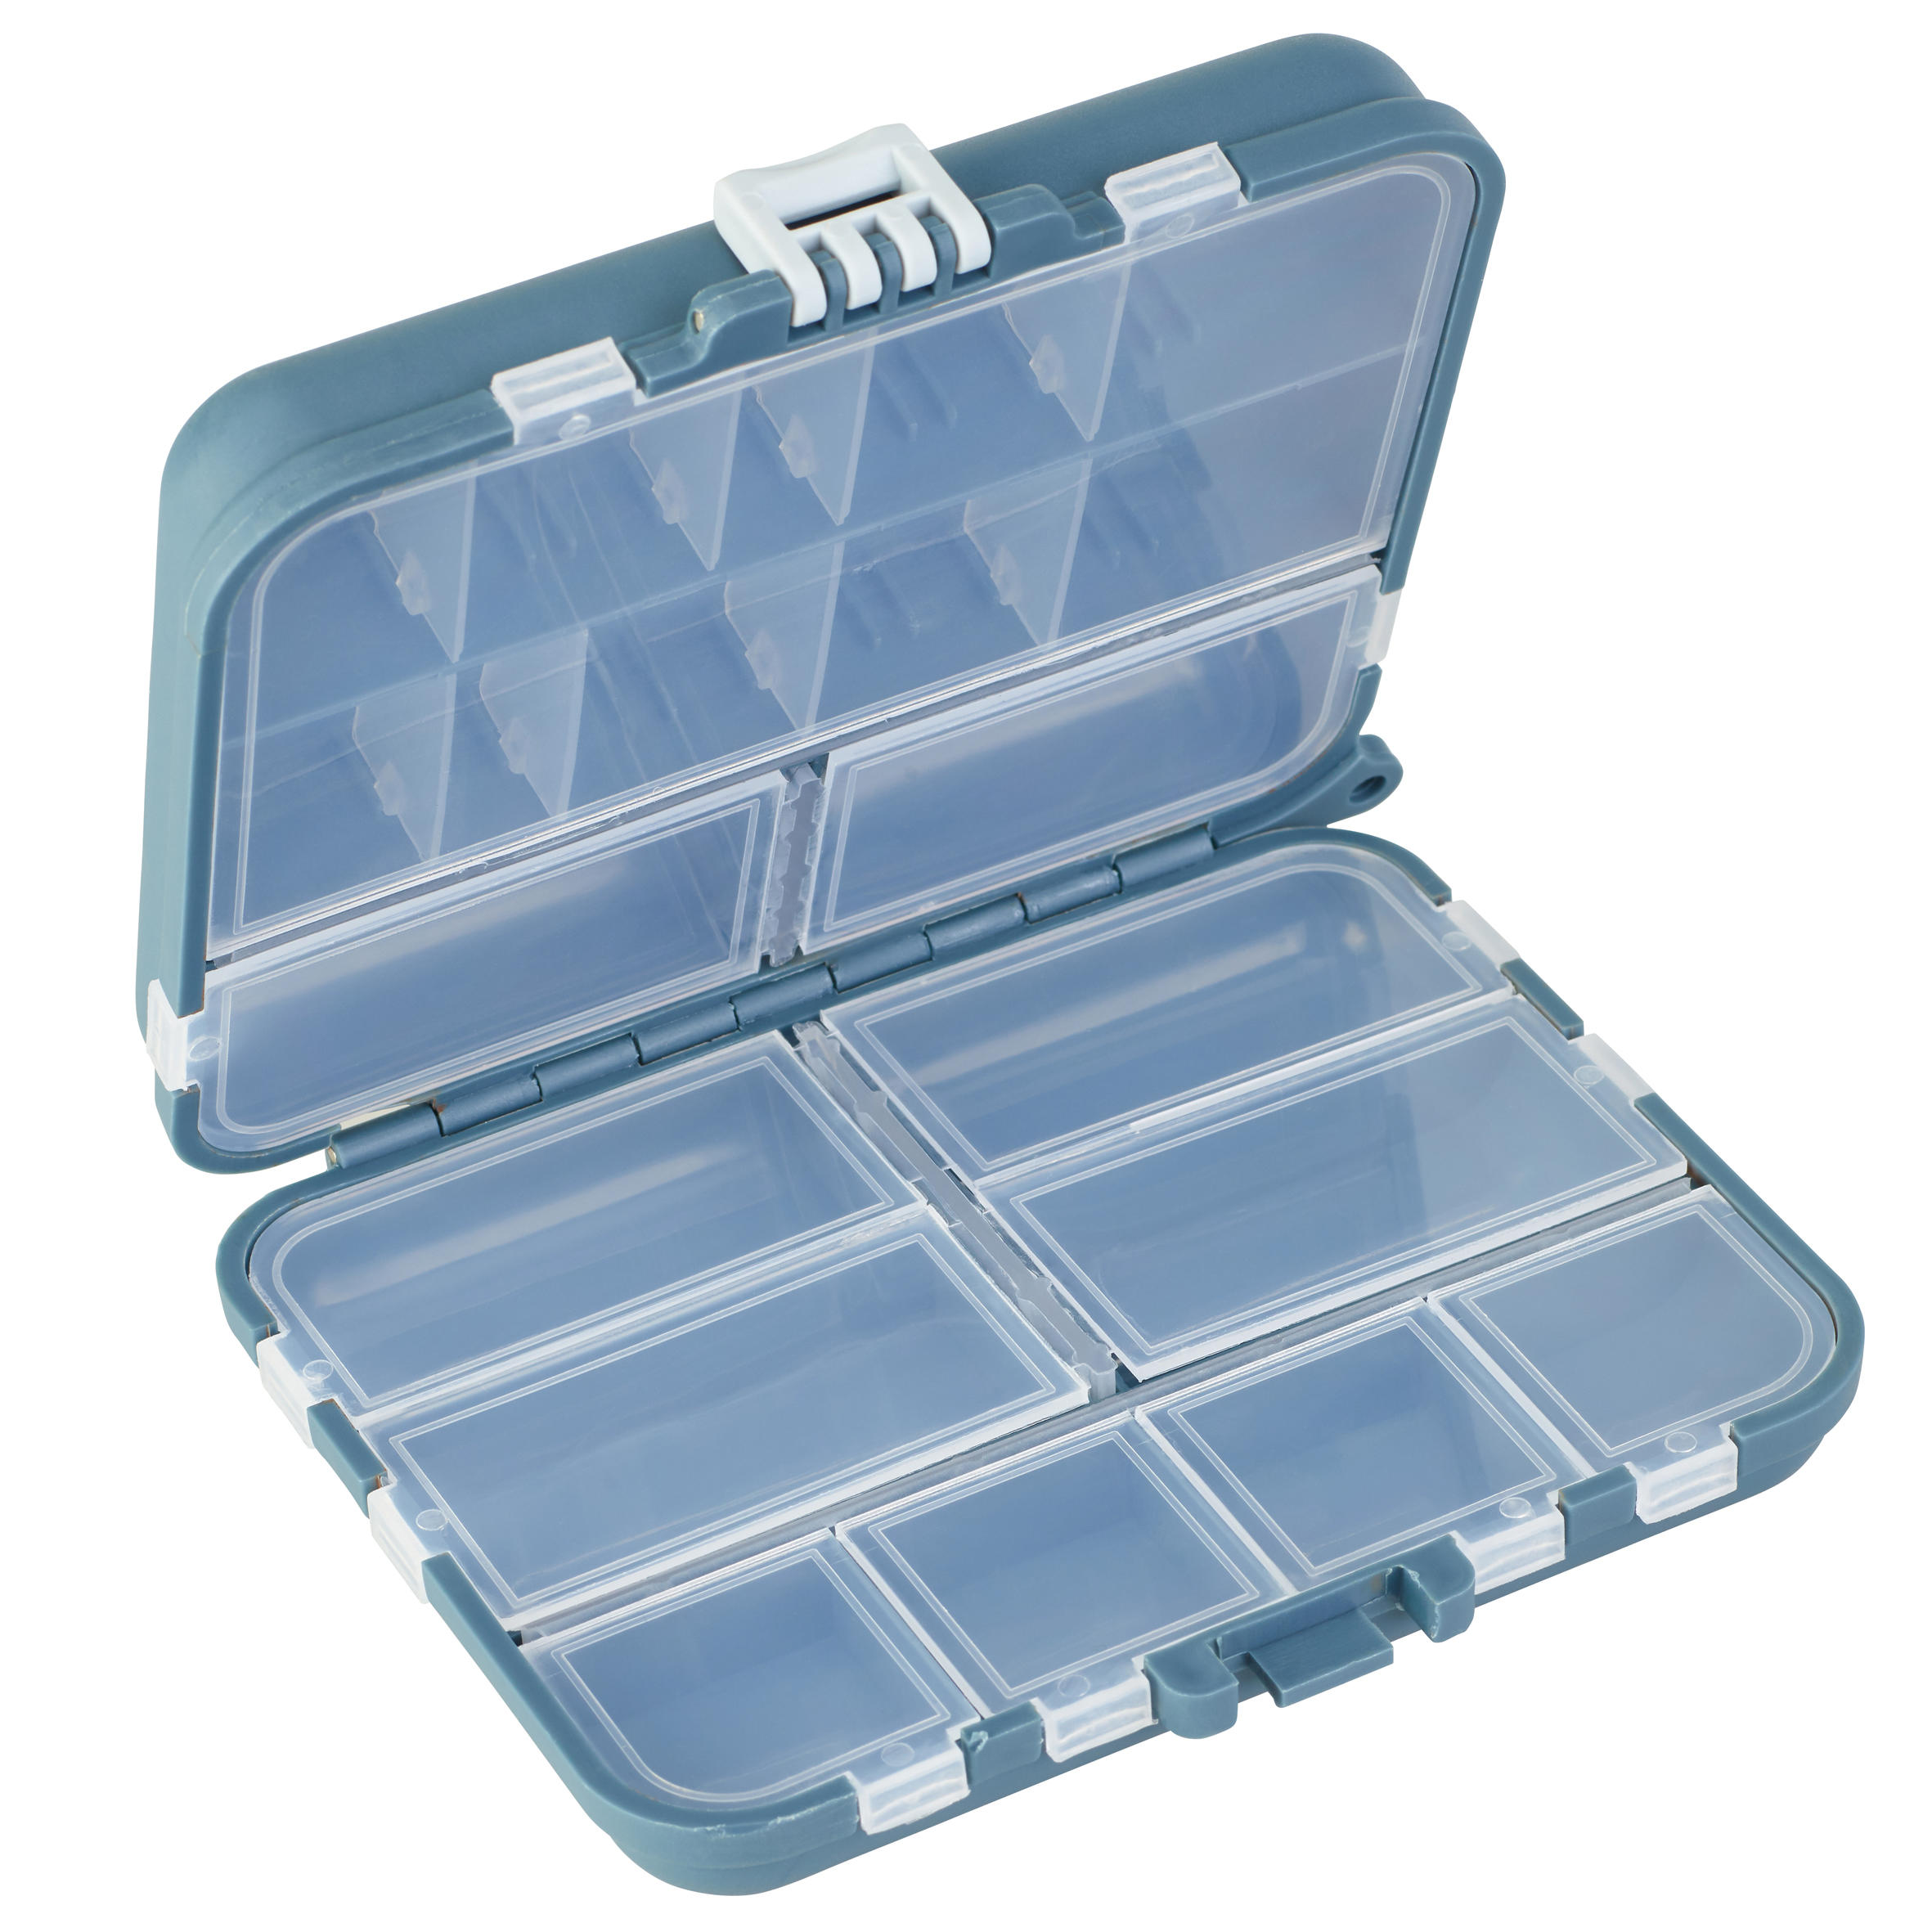  SOUTH BEND137-Piece Deluxe Tackle Kit : Fishing Tackle Boxes :  Sports & Outdoors